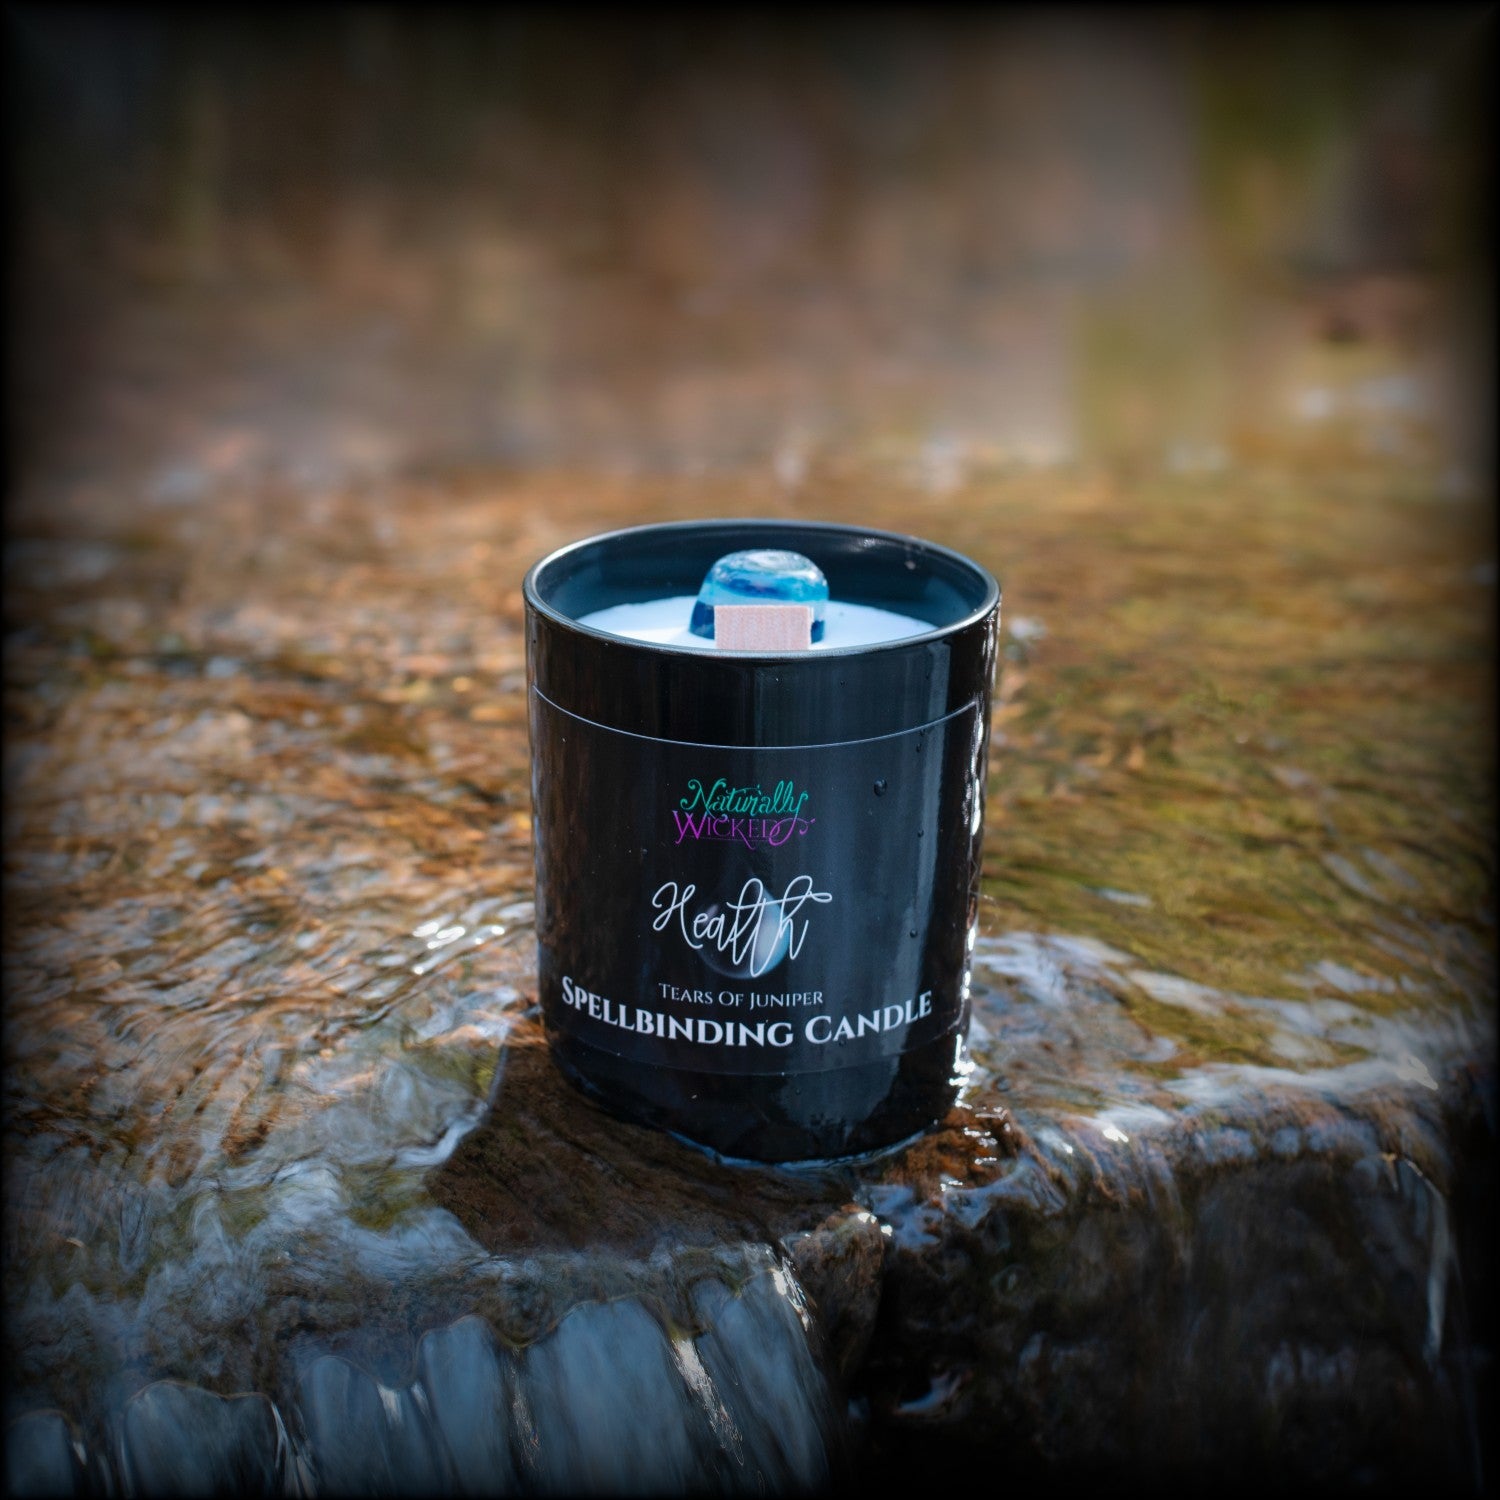 A Scenic View Of The Perfect Spell Candle situated in a crystal clear waterfall.  Naturally Wicked Spellbinding Health Candle Proudly Presents It's Dark Black Gloss Label With A Blue Water Tear On The Front. The Candle Features Plant-based Smooth Blue Wax, A Wood Wick And A Beautiful Teal Banded Agate Crystal. A Unique Gift For All